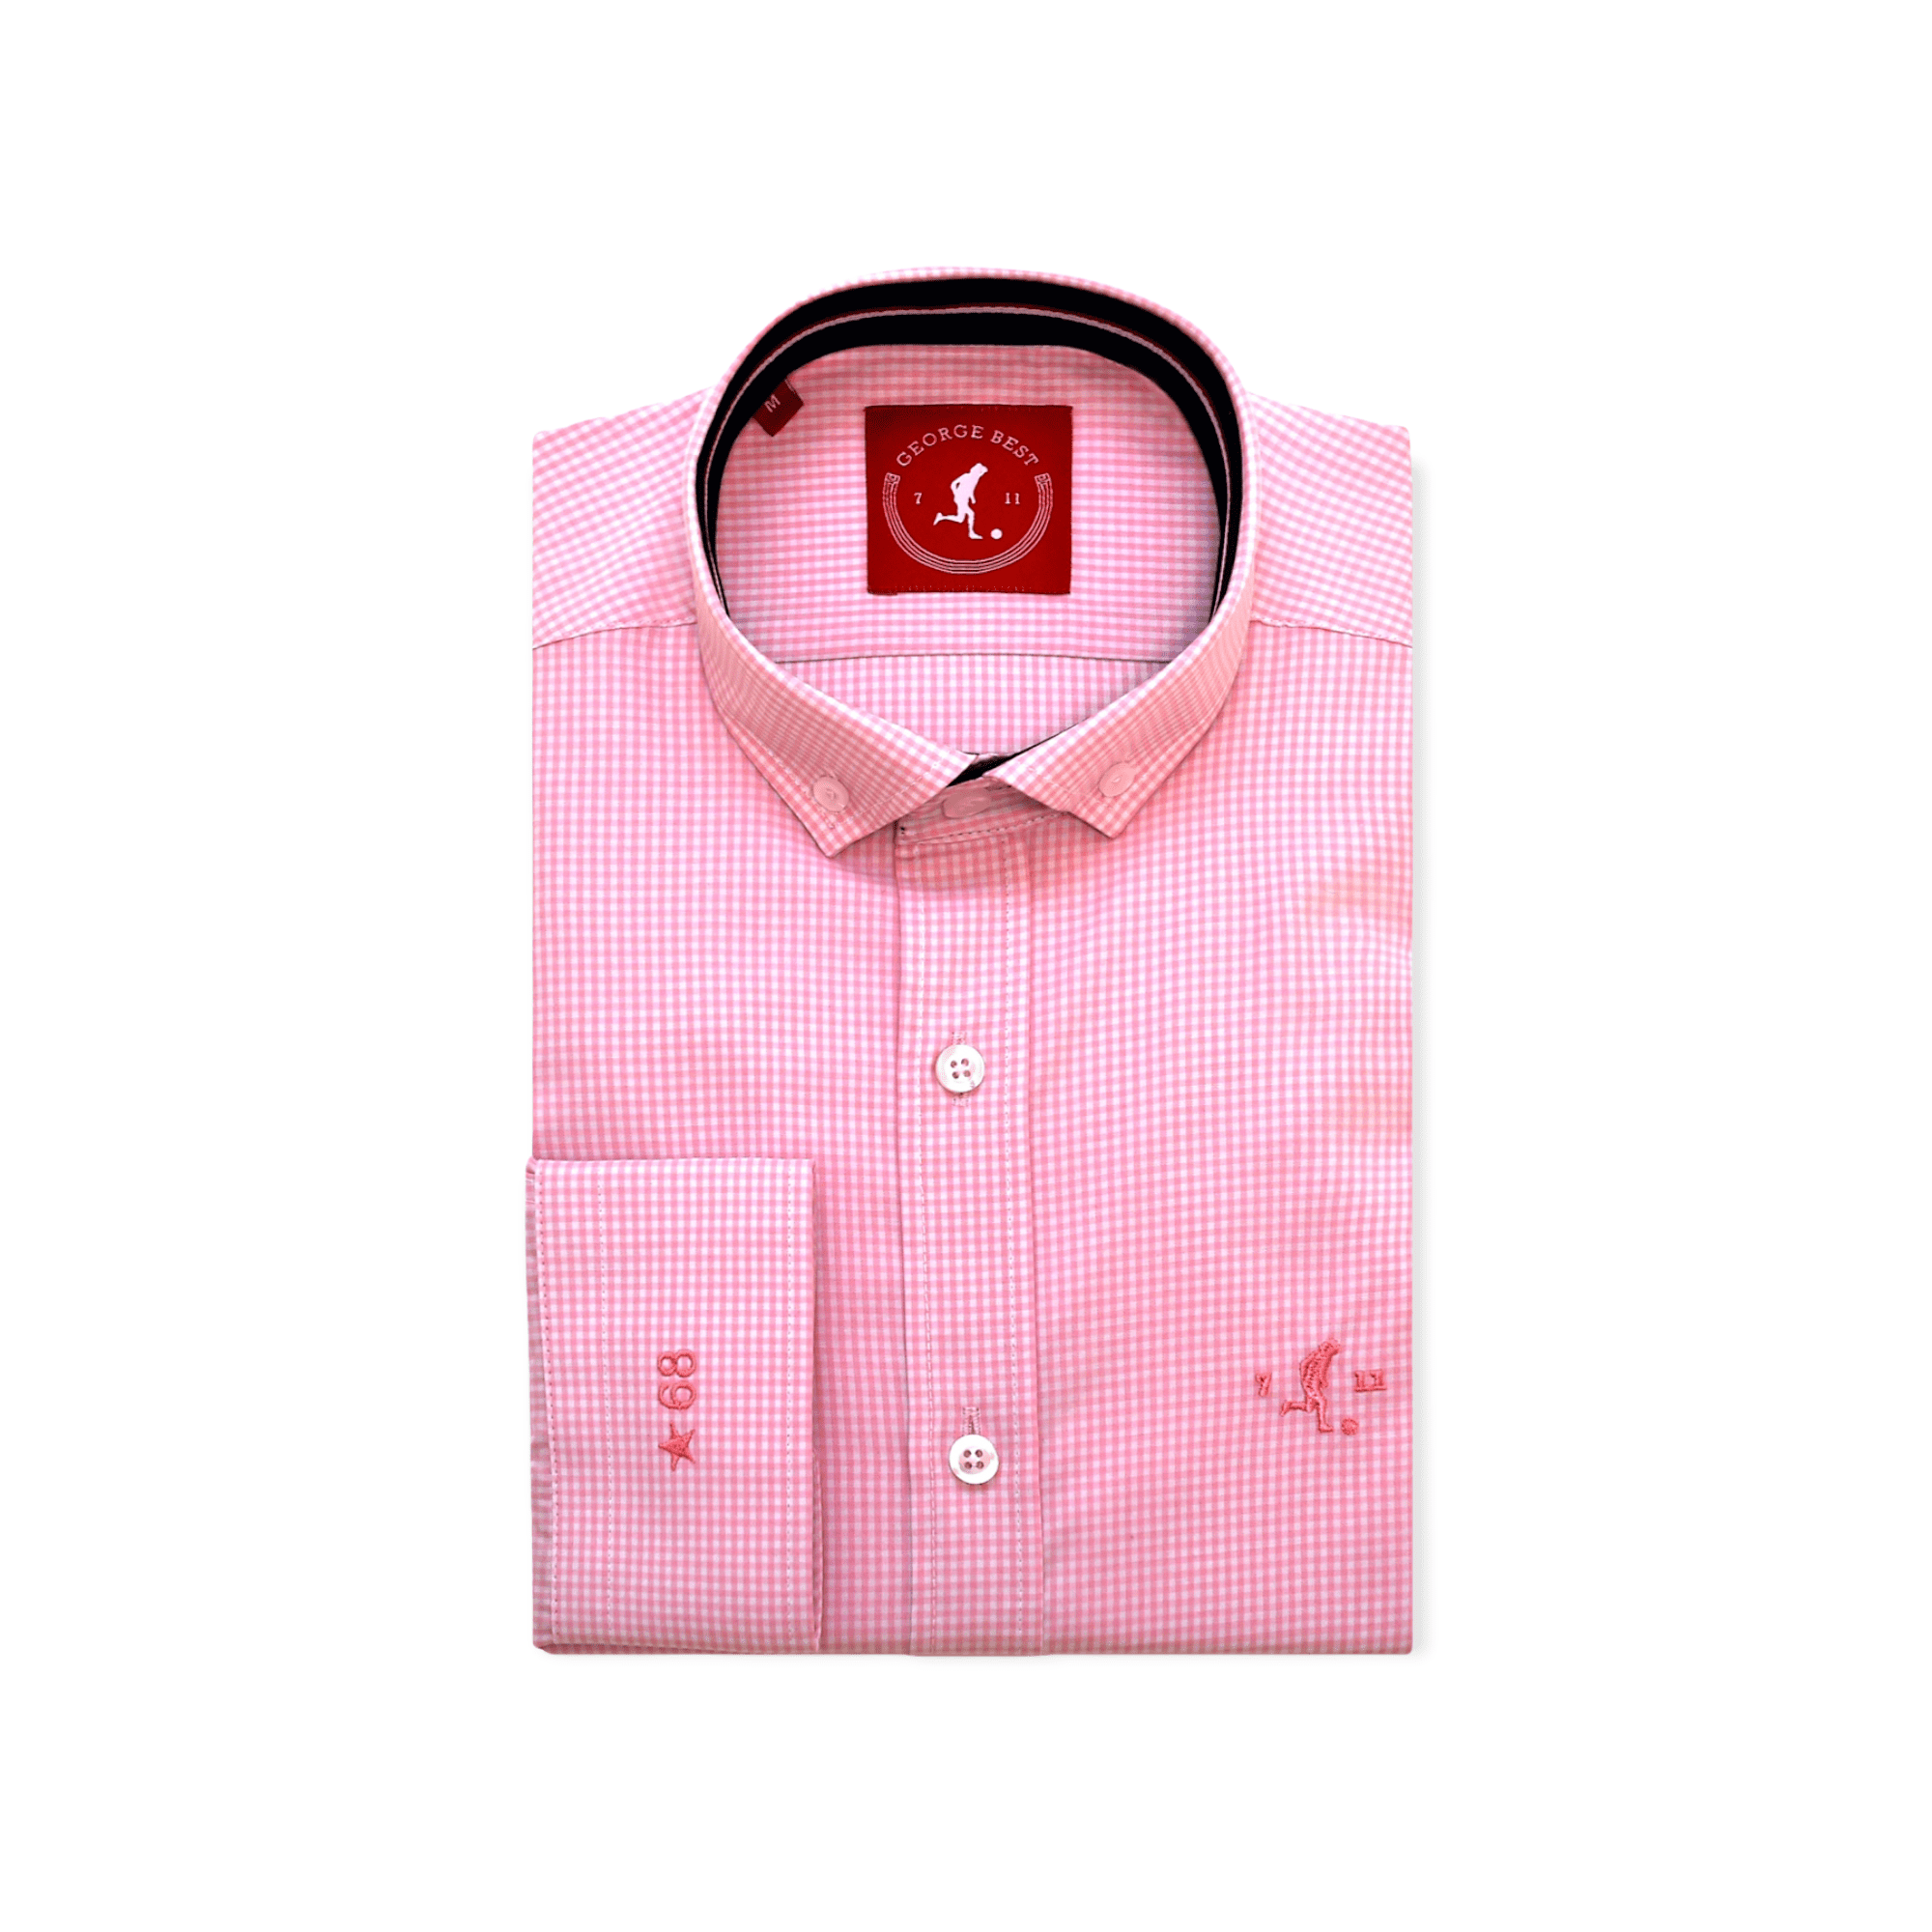 Pink Gingham Check Shirt With Button Down Collar